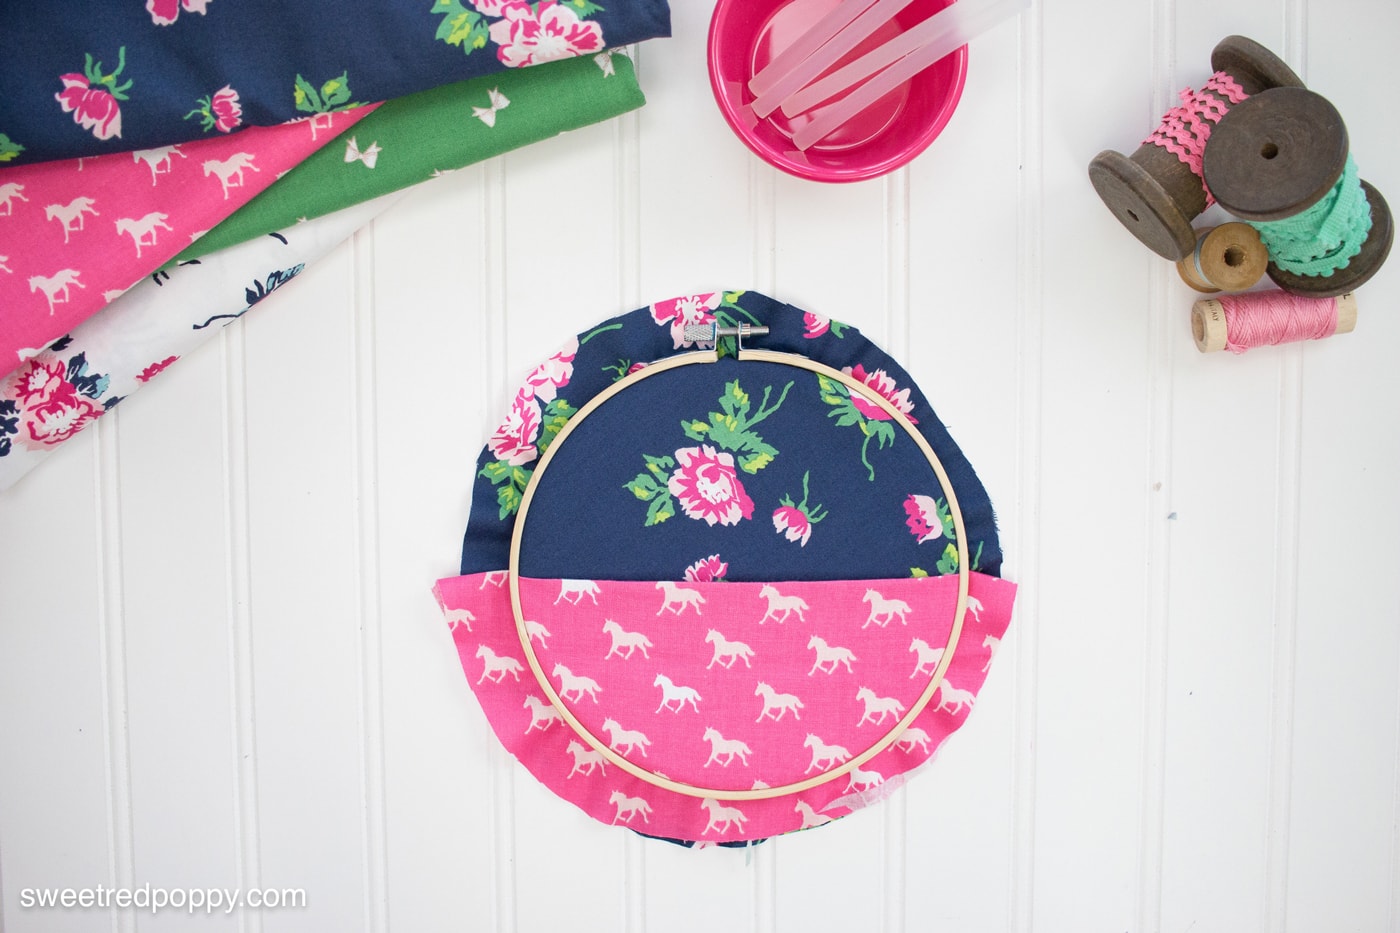 How to make an embroidery hoop hanging wall organizer